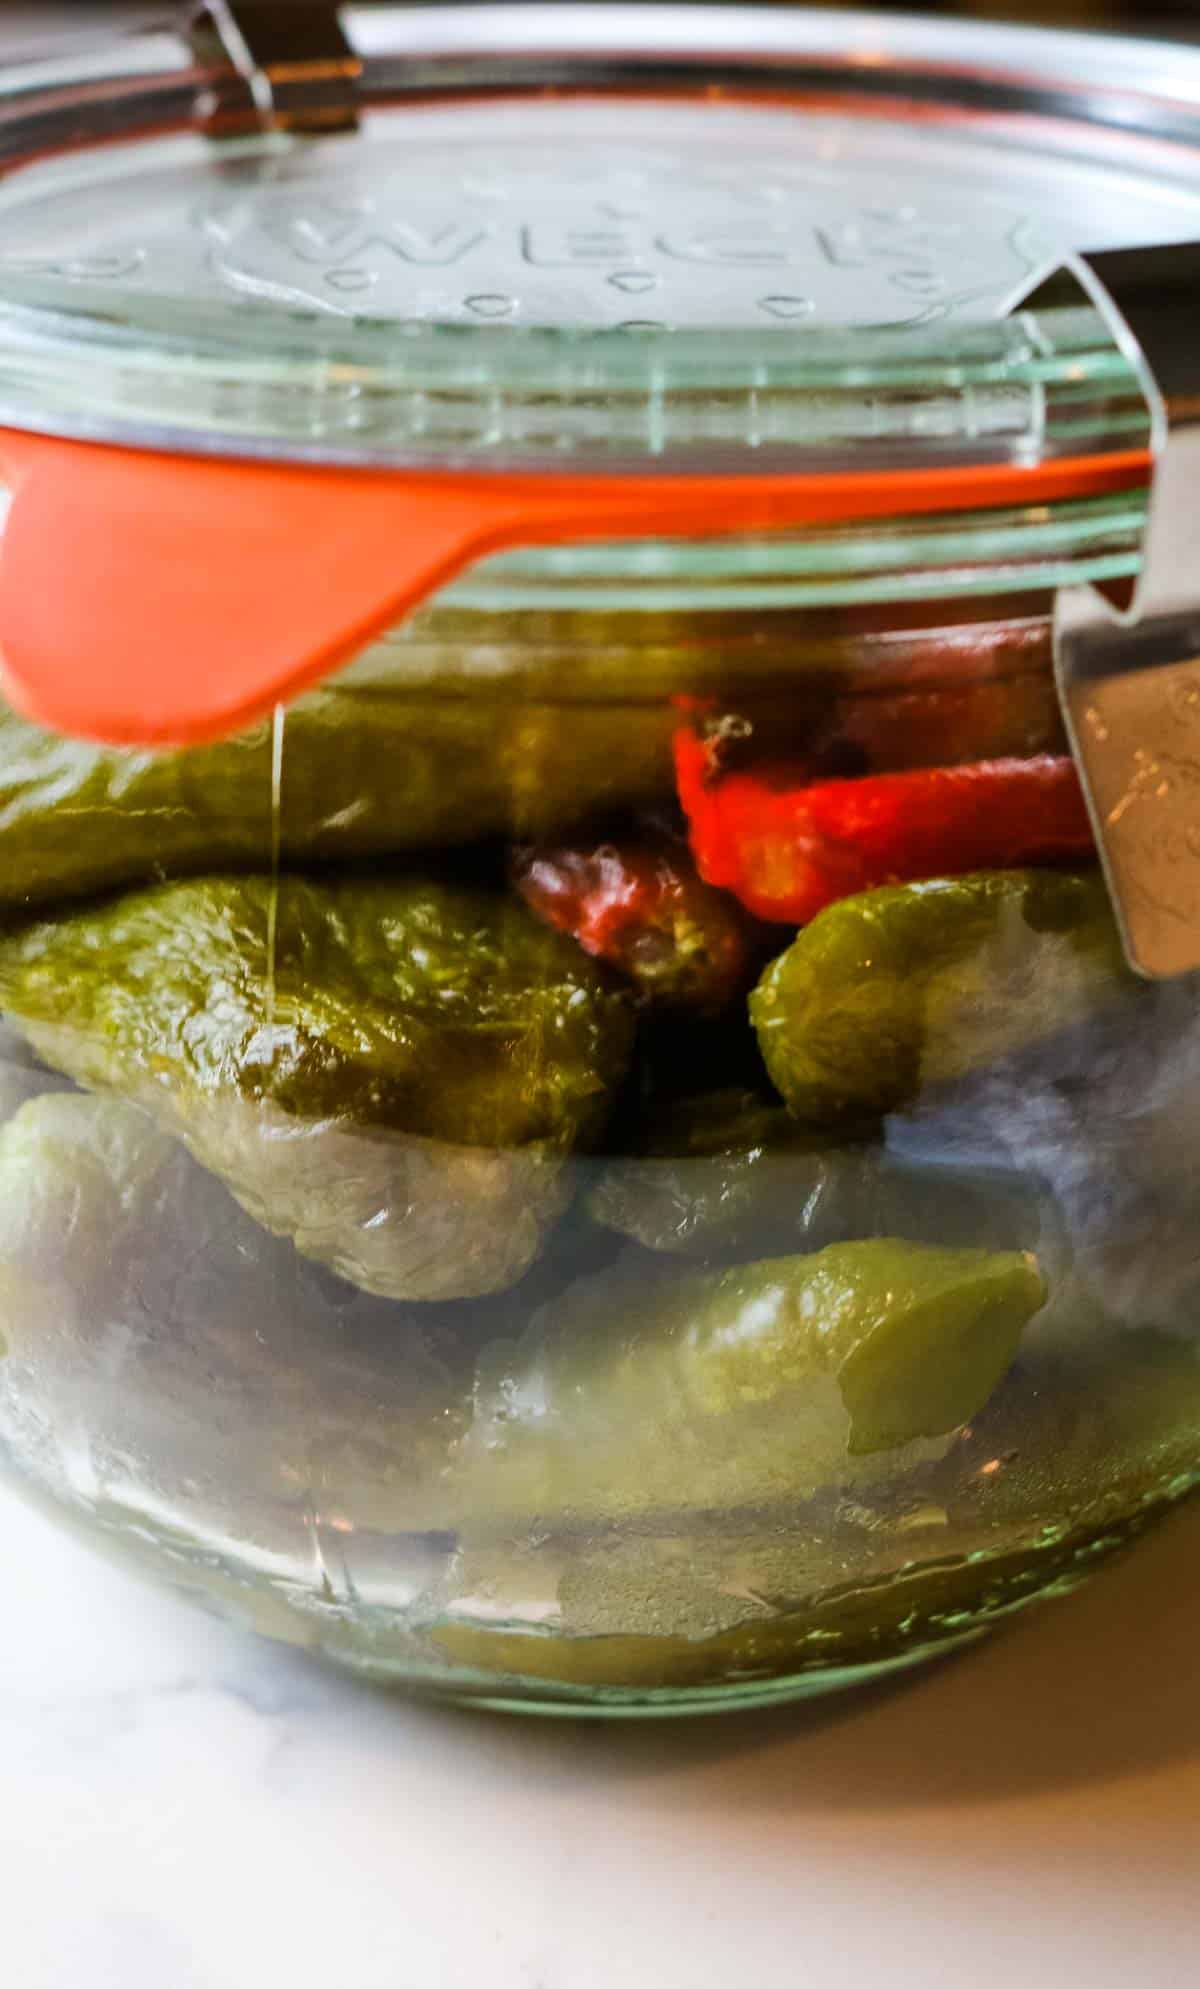 jalapeno peppers in a weck jar.